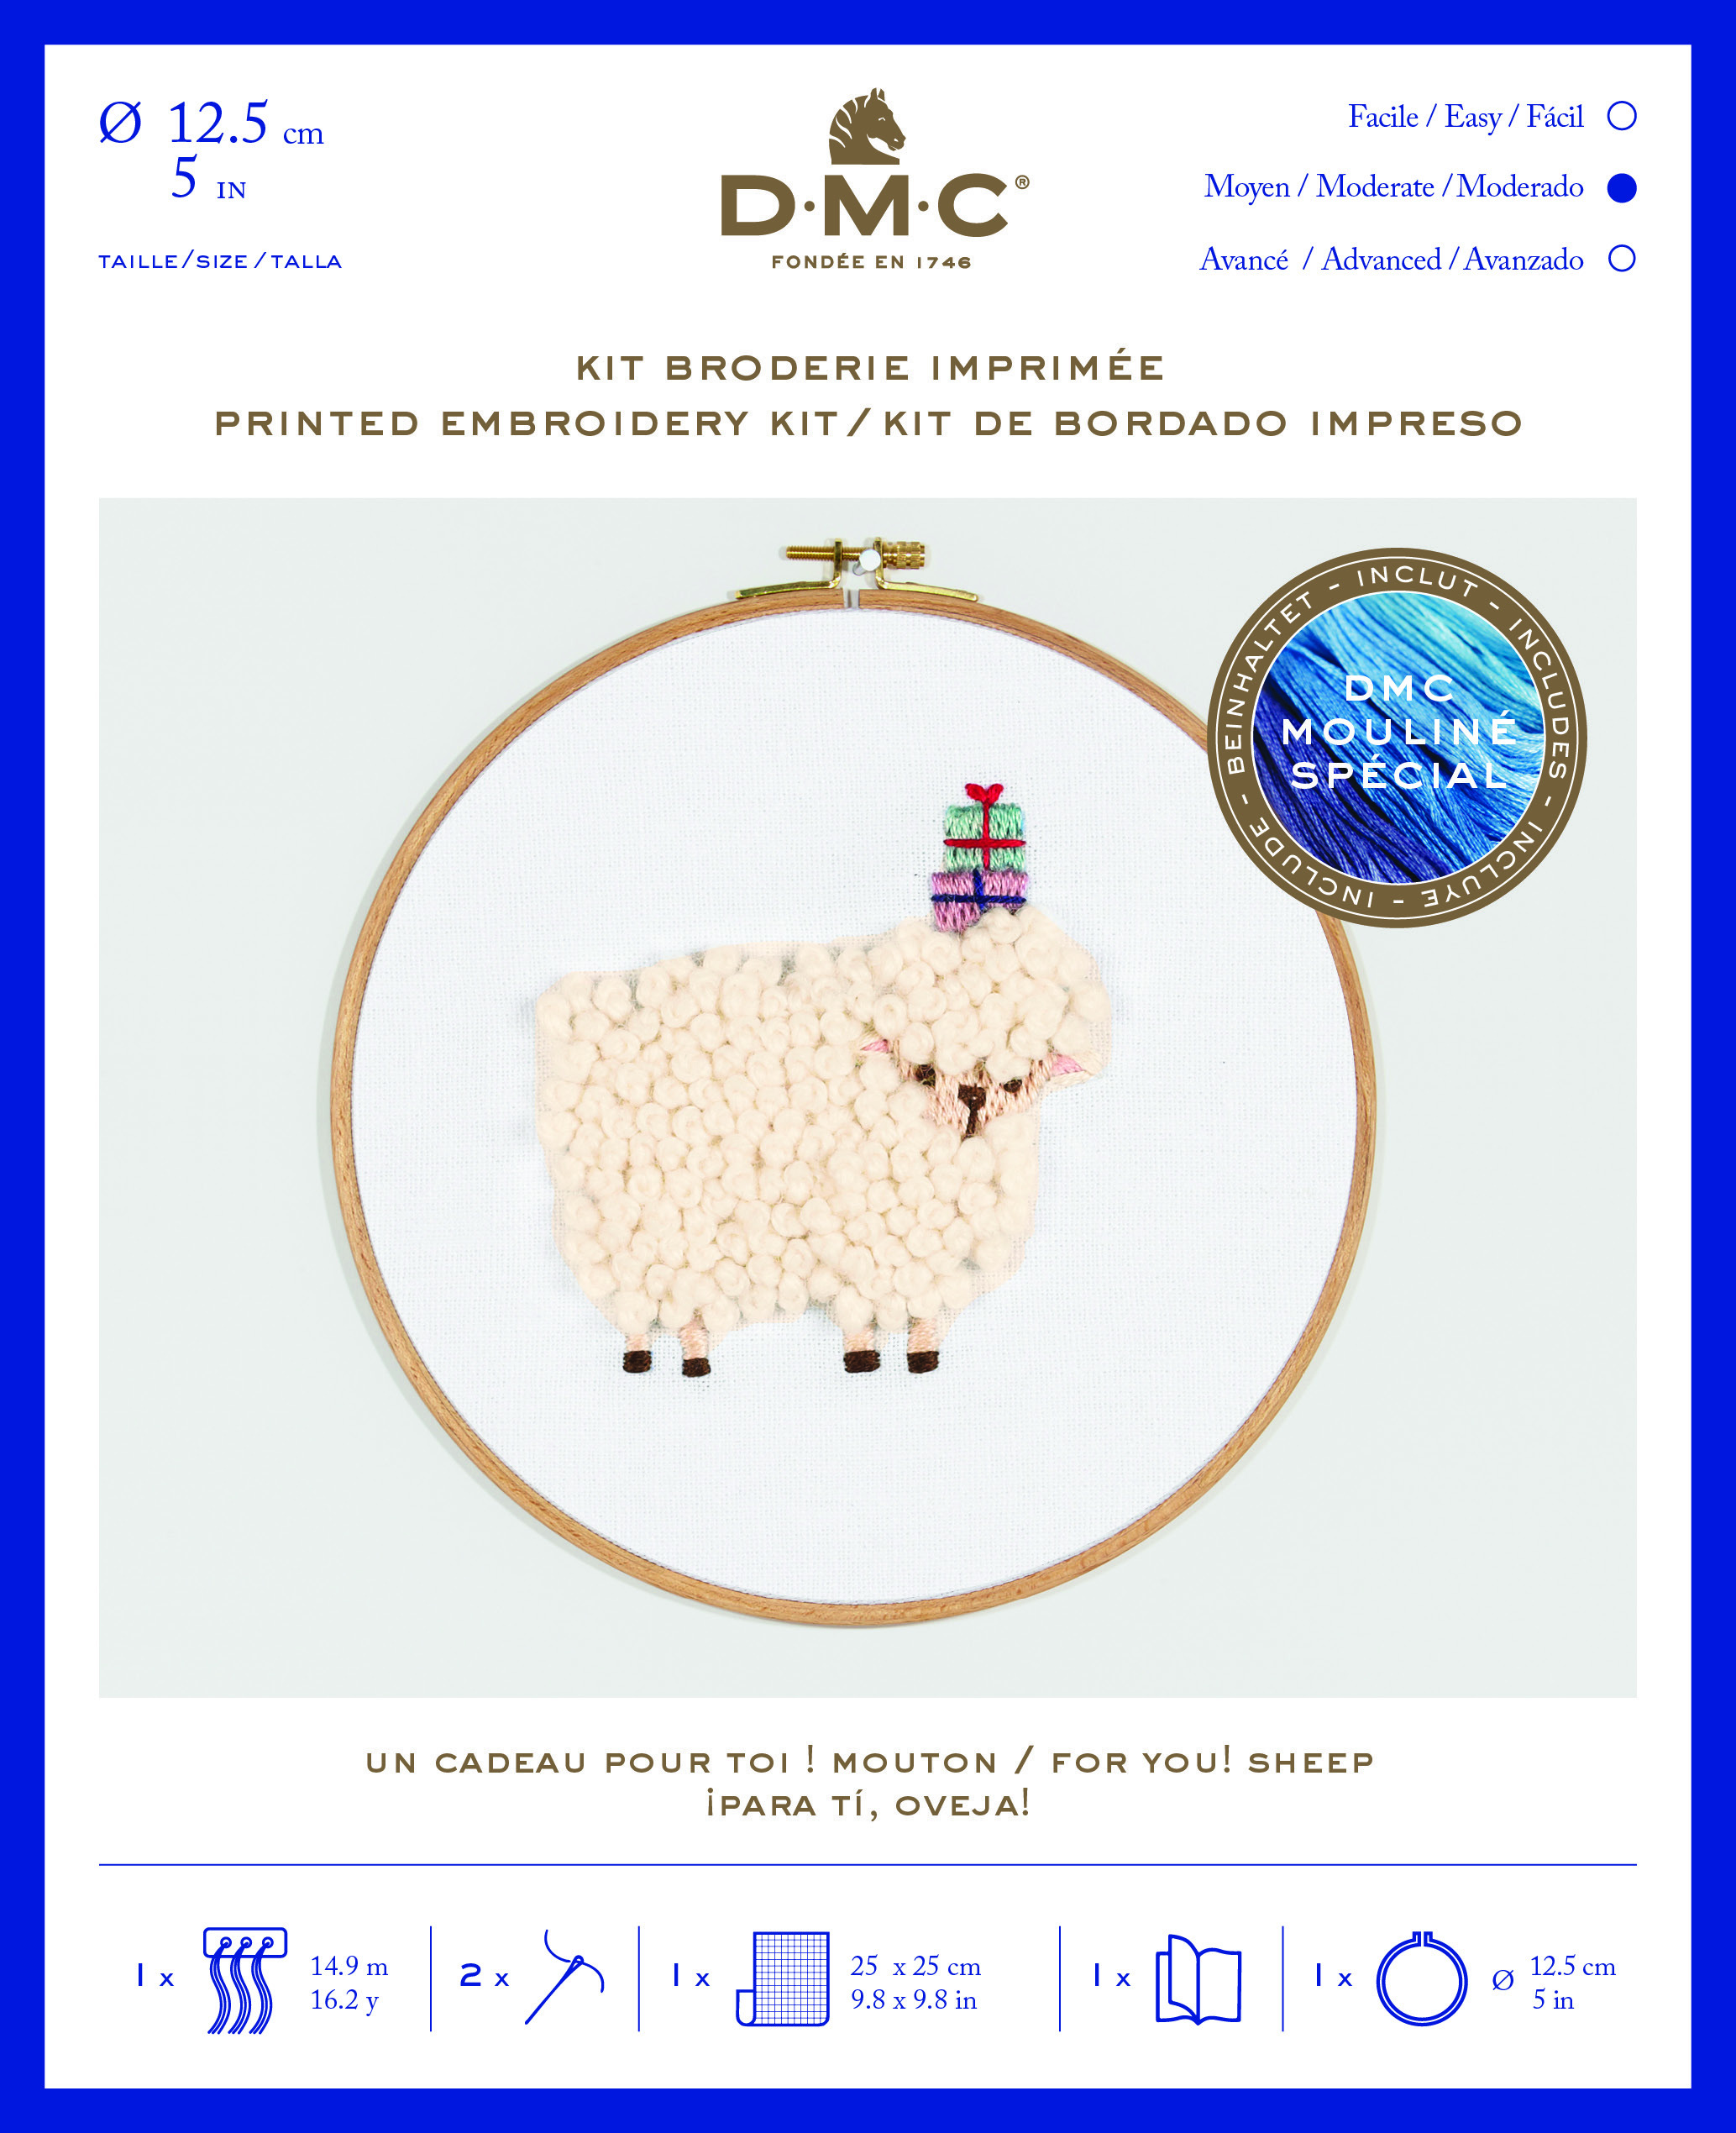 DMC TB128 Invitation Wooden embroidery hoop included Crocodile Printed Embroidery Kit